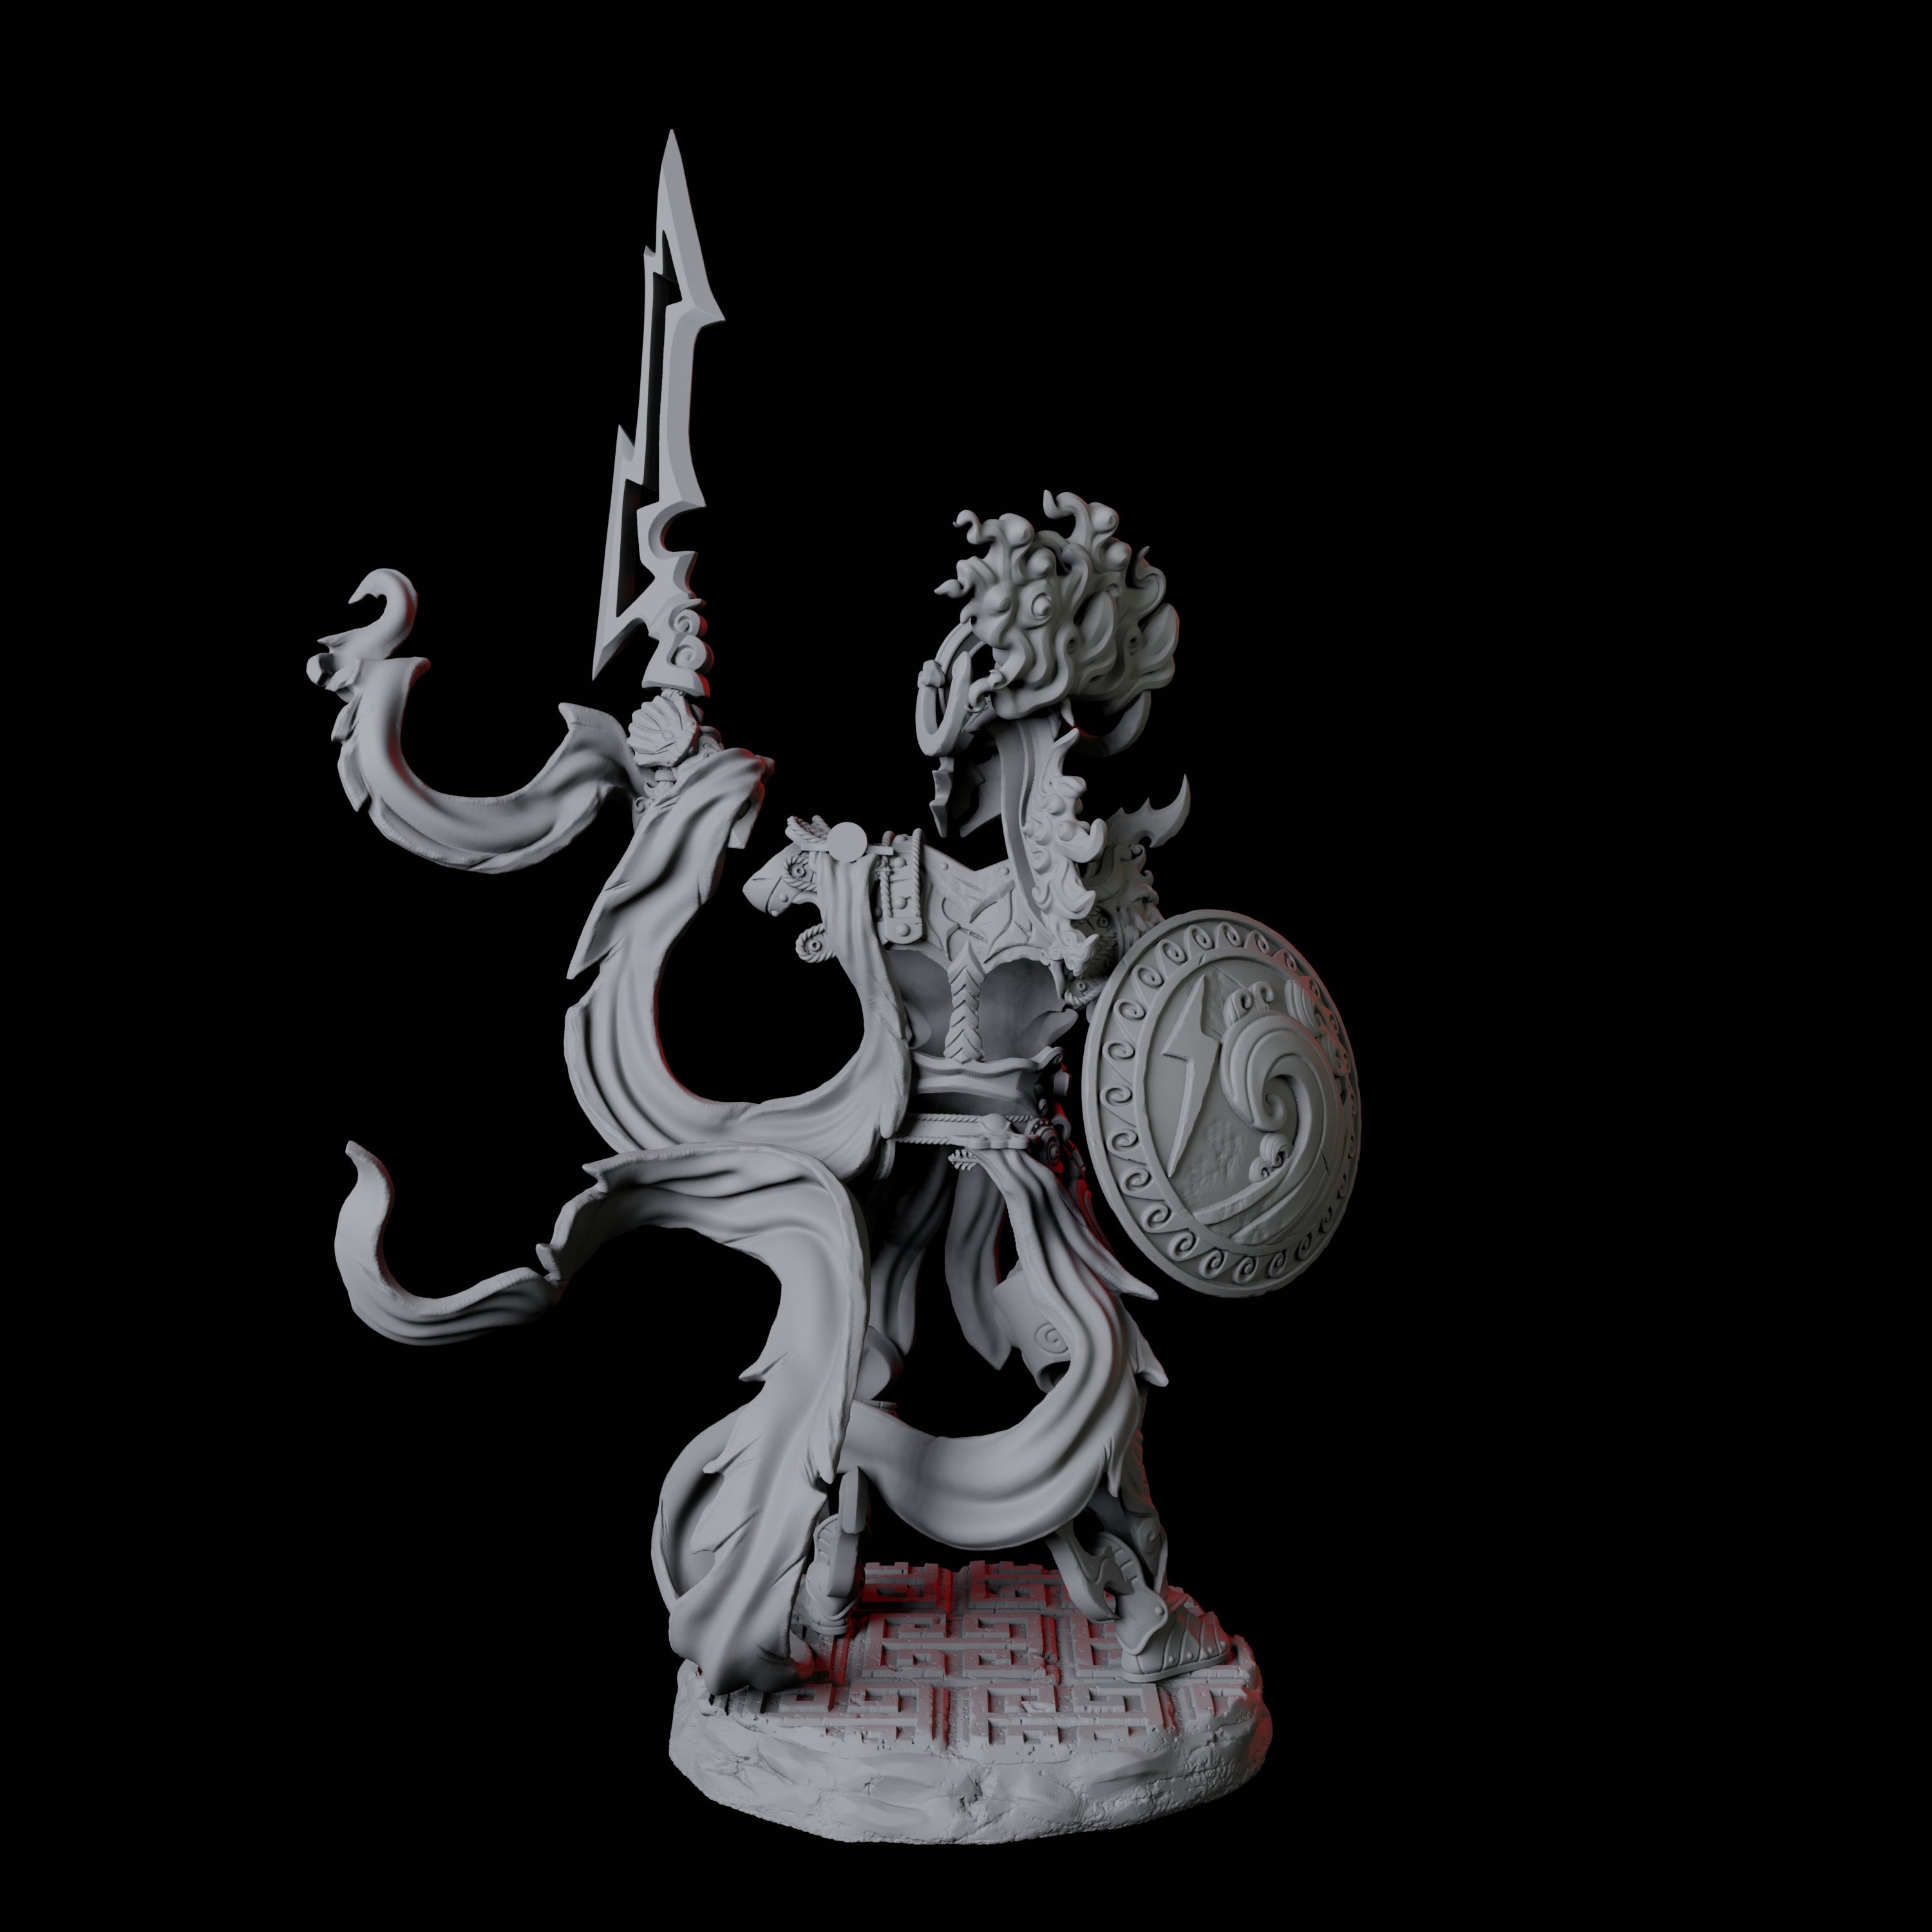 Shield Guardian B Miniature for Dungeons and Dragons, Pathfinder or other TTRPGs